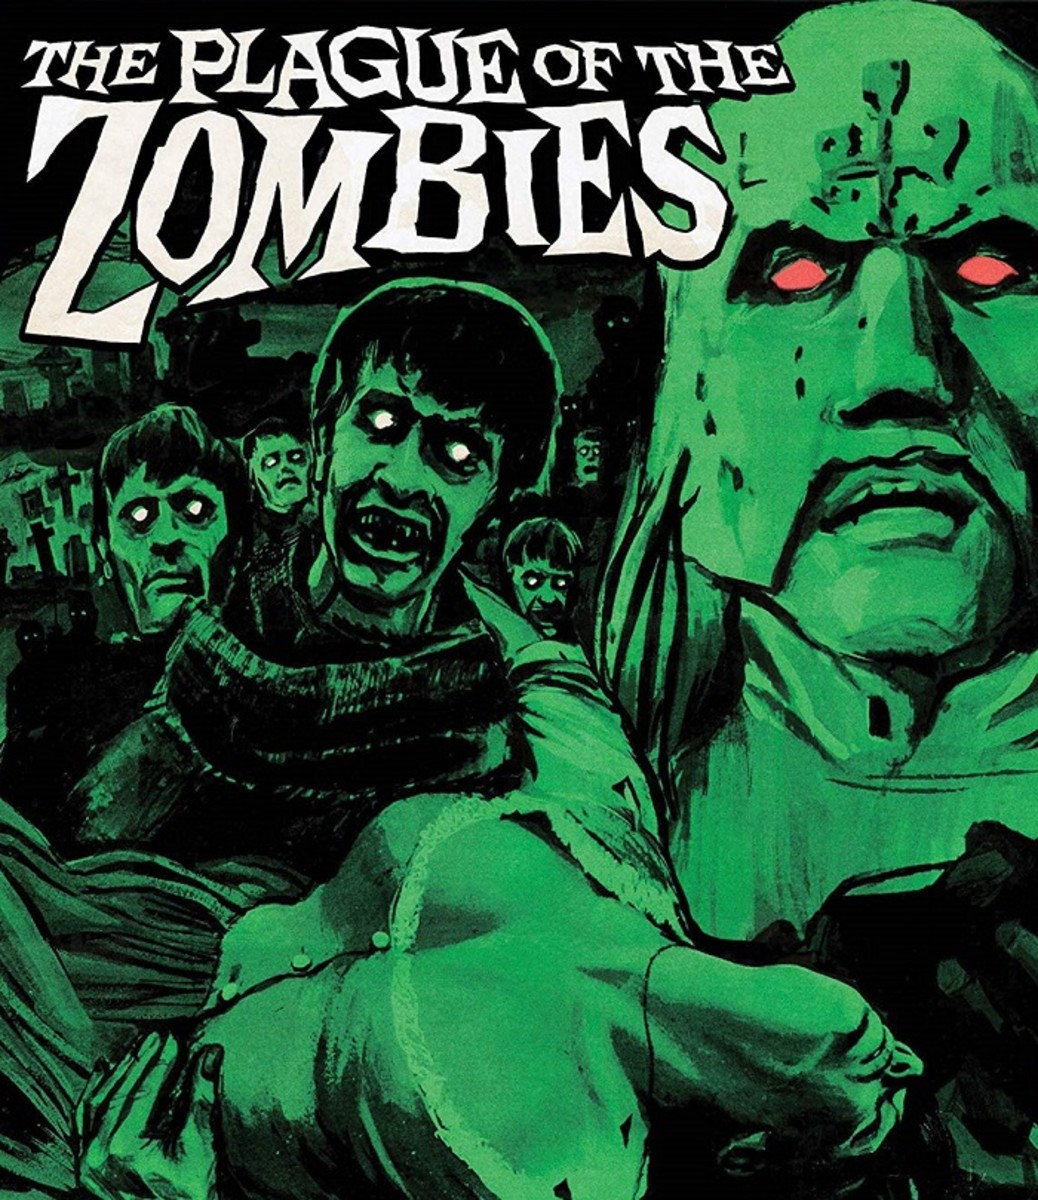 "The Plague of the Zombies" movie poster.